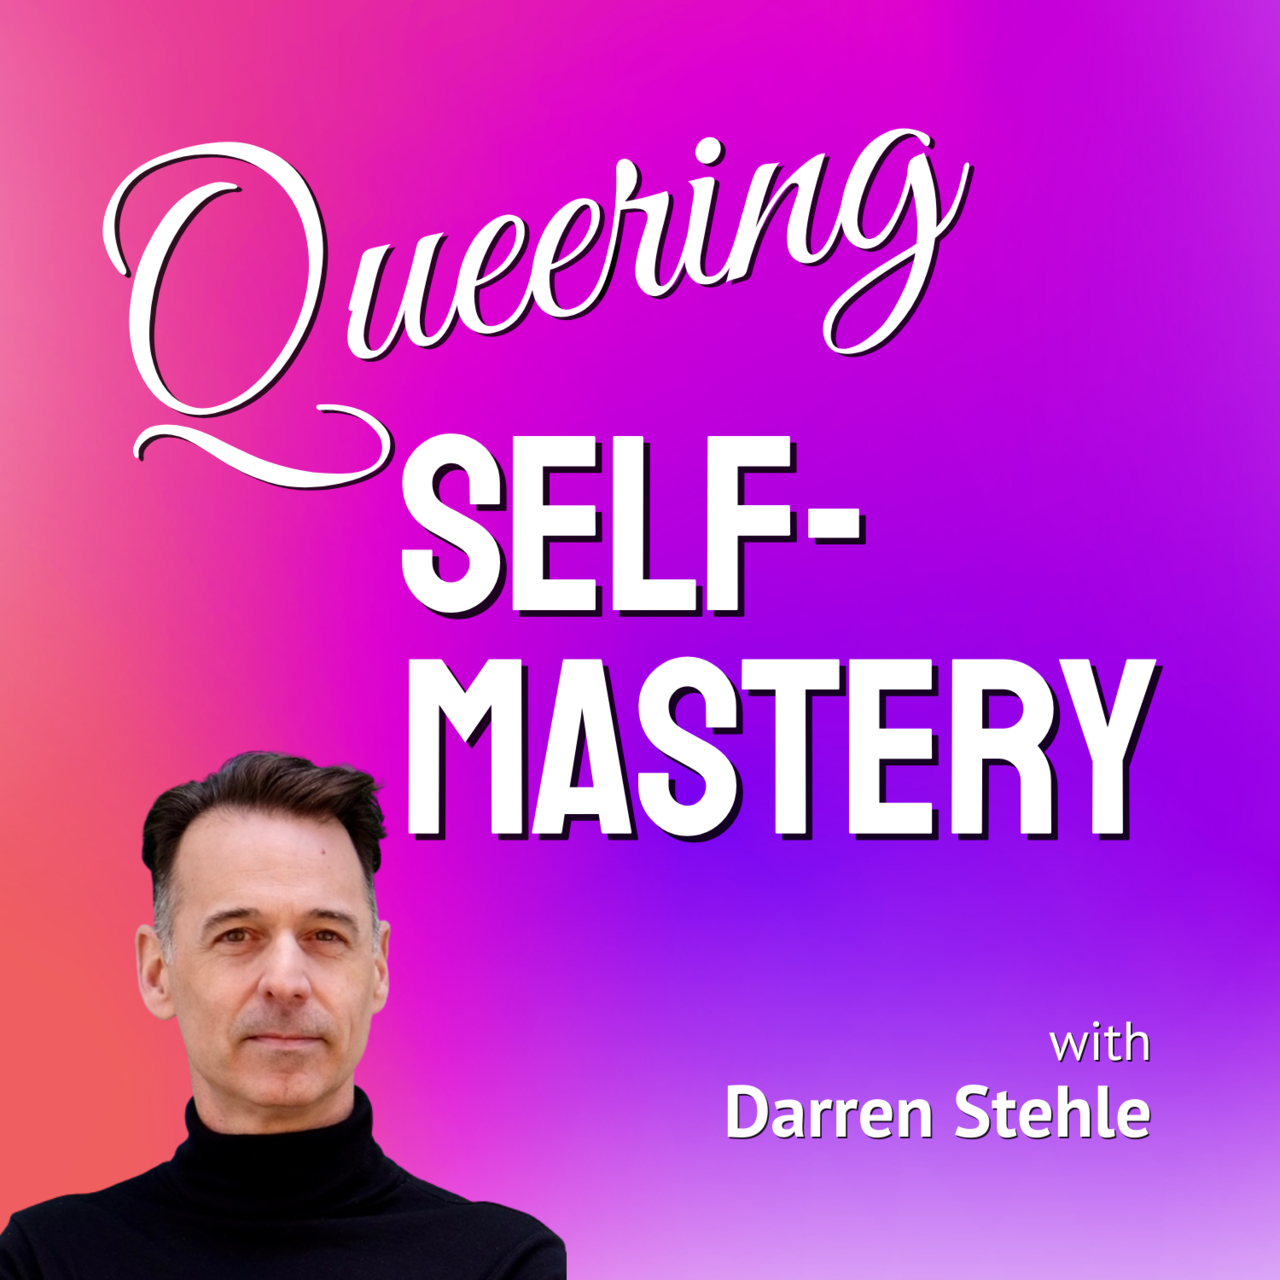 Queering Self-Mastery with Darren Stehle